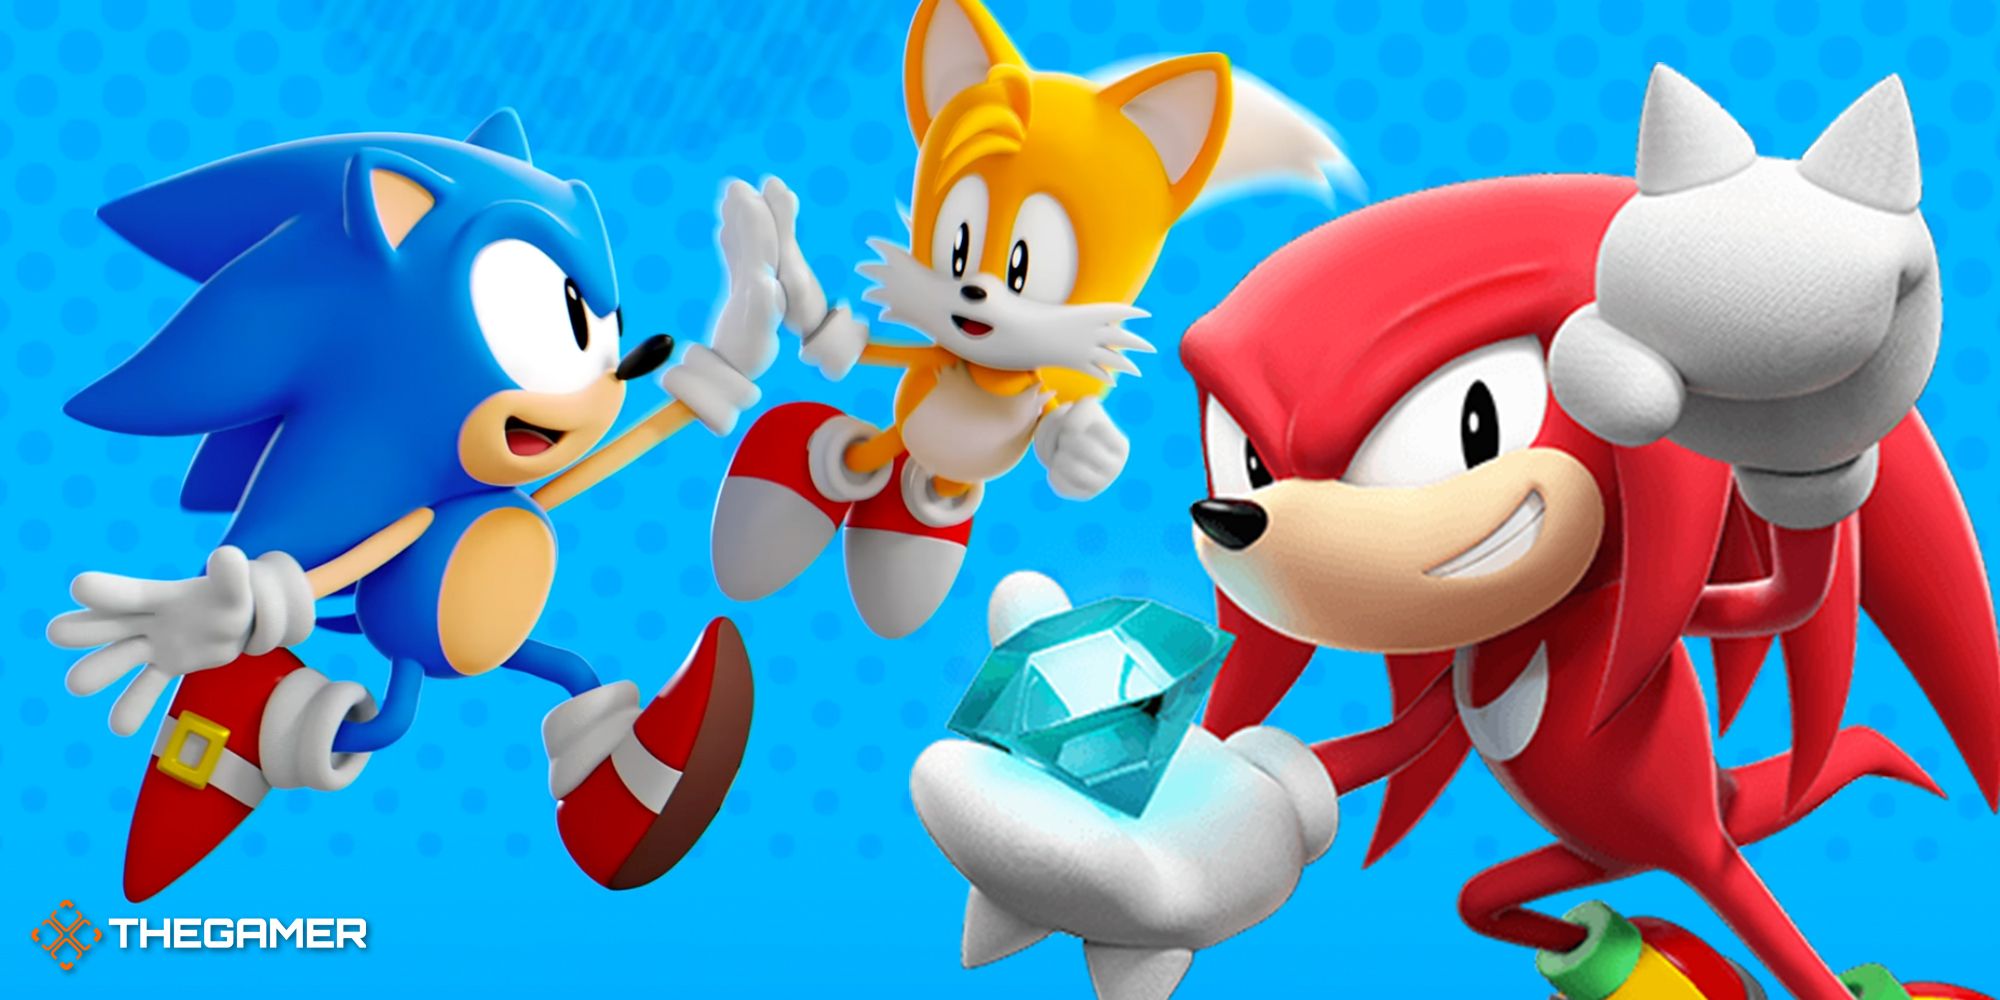 sonic and tails hitting a high five, and knuckles holding a chaos emerald in superstars